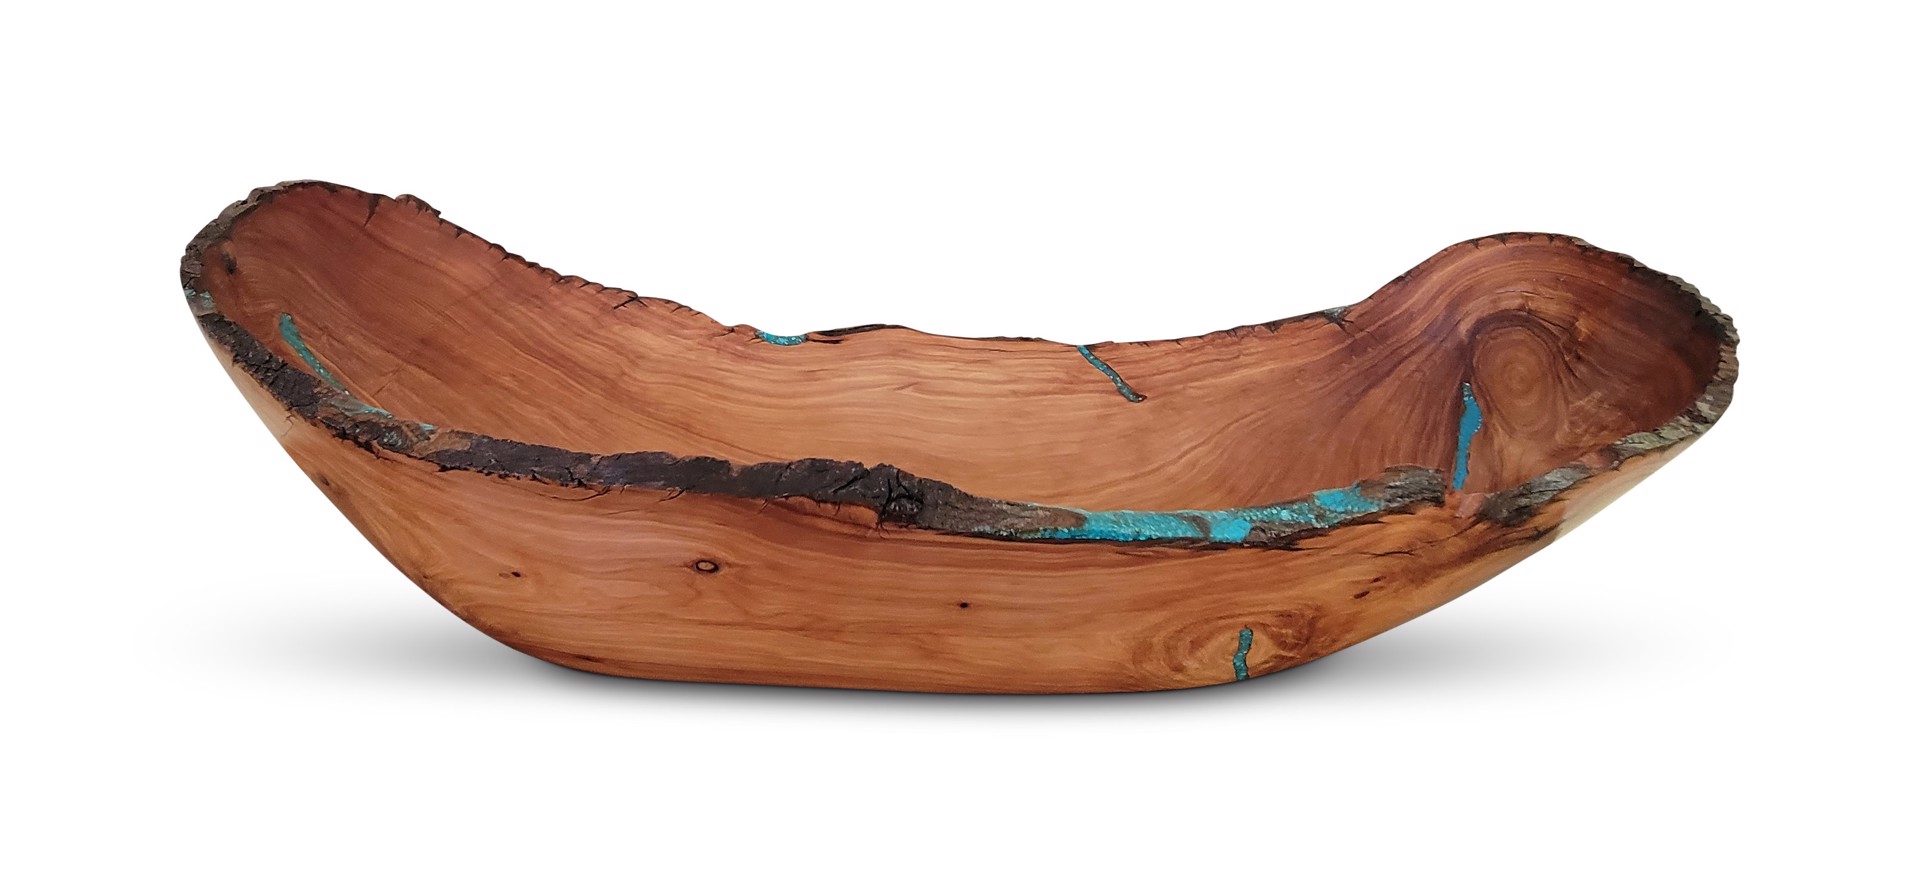 Juniper Bowl with Turquoise Inlay by Scott & Stephanie Shangraw